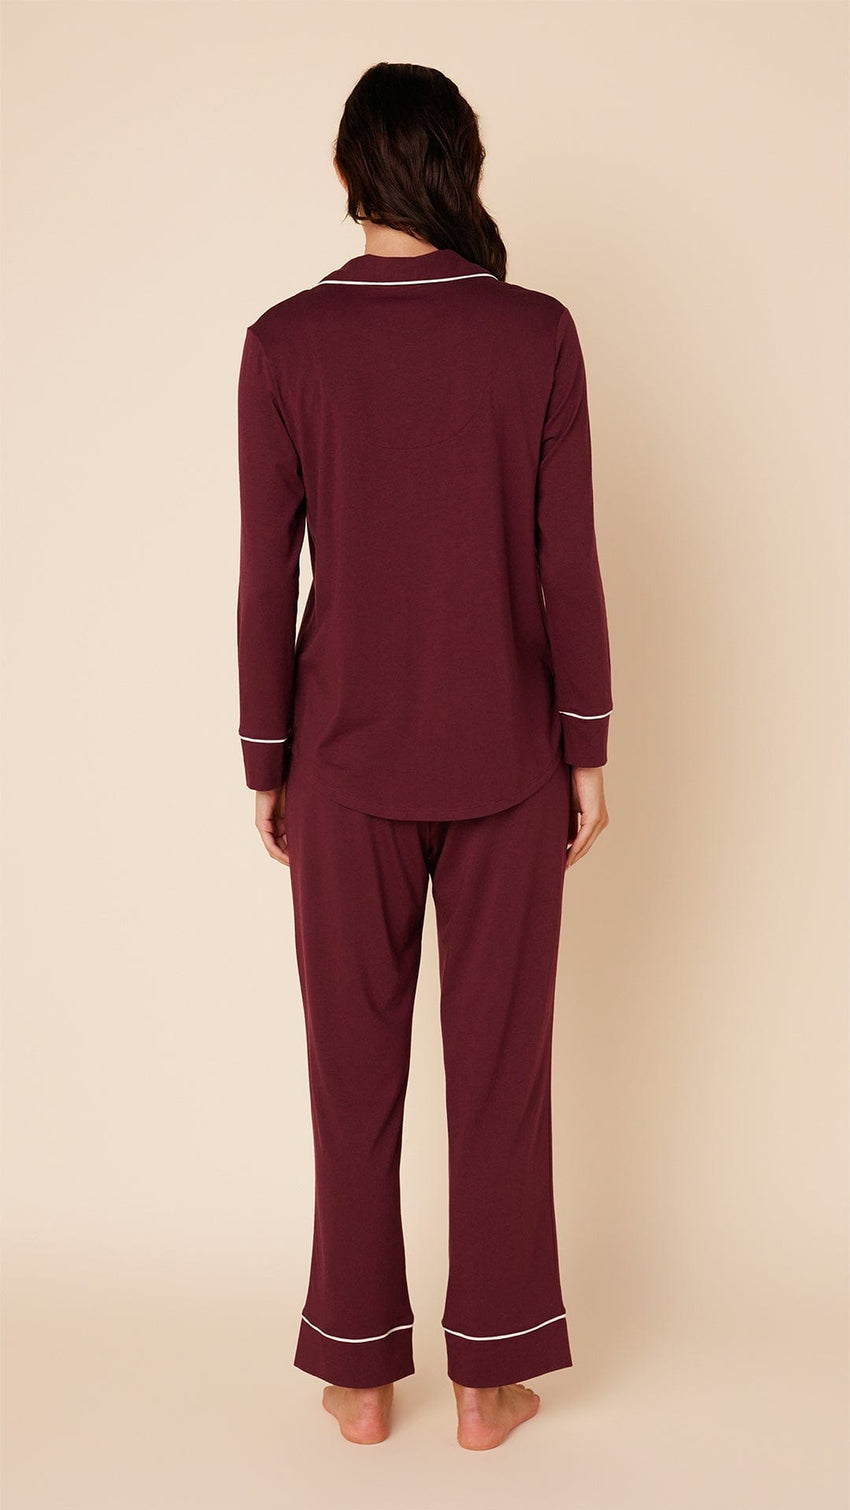 Classic Pima Knit Pajama - Mulled Wine Hover Mulled Wine